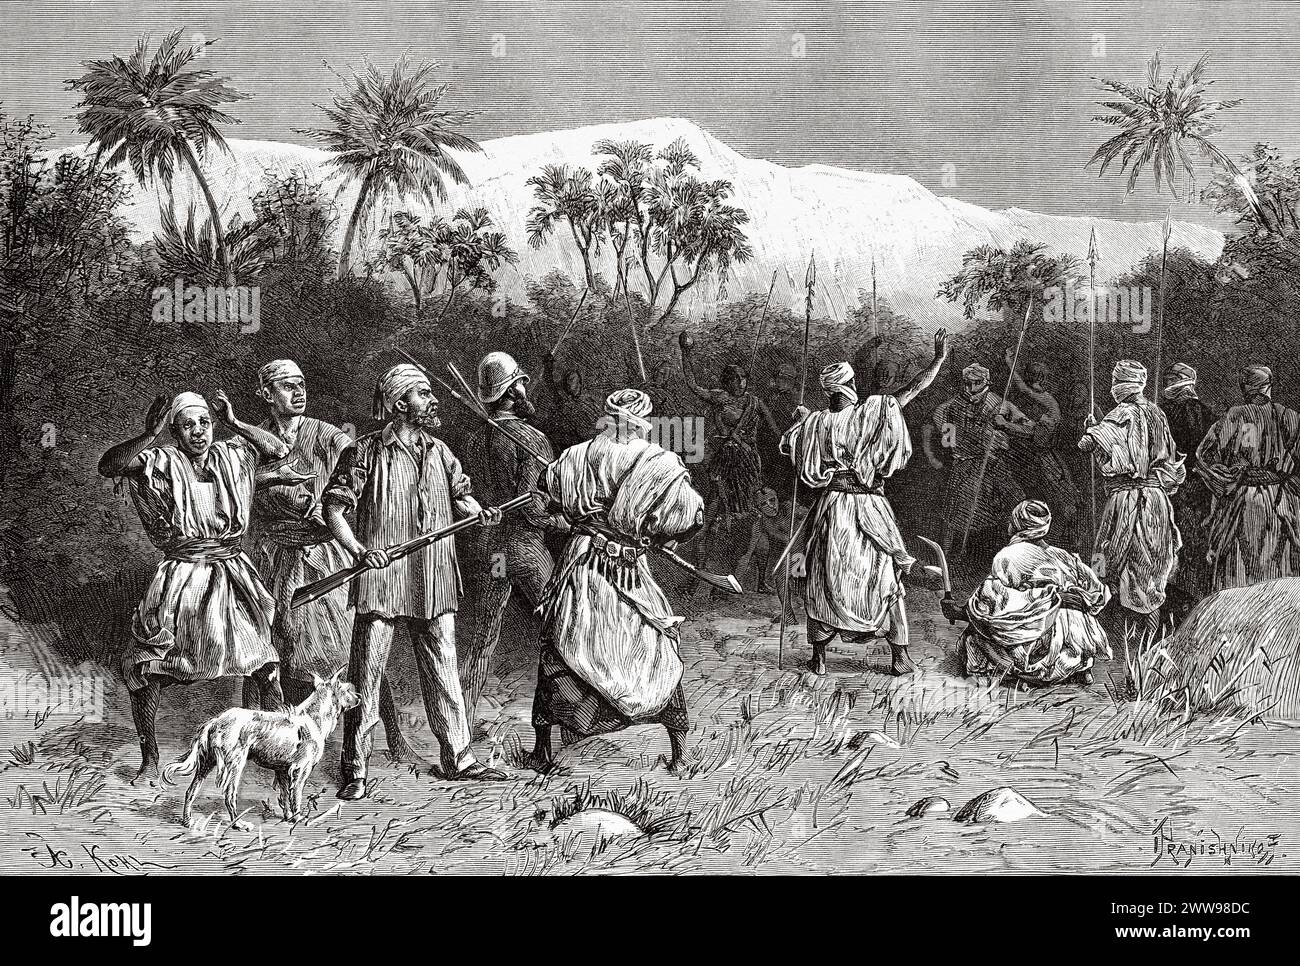 Arami, the expedition guide tries to calm the crowd, Tibesti Region, Chad, Africa. Drawing by Ivan Pranishnikoff (1841 - 1909) Two months in Tibesti, episodes from travels in Africa 1869-1873 by Dr. Gustav Hermann Nachtigal (1834 - 1885) Le Tour du Monde 1880 Stock Photo